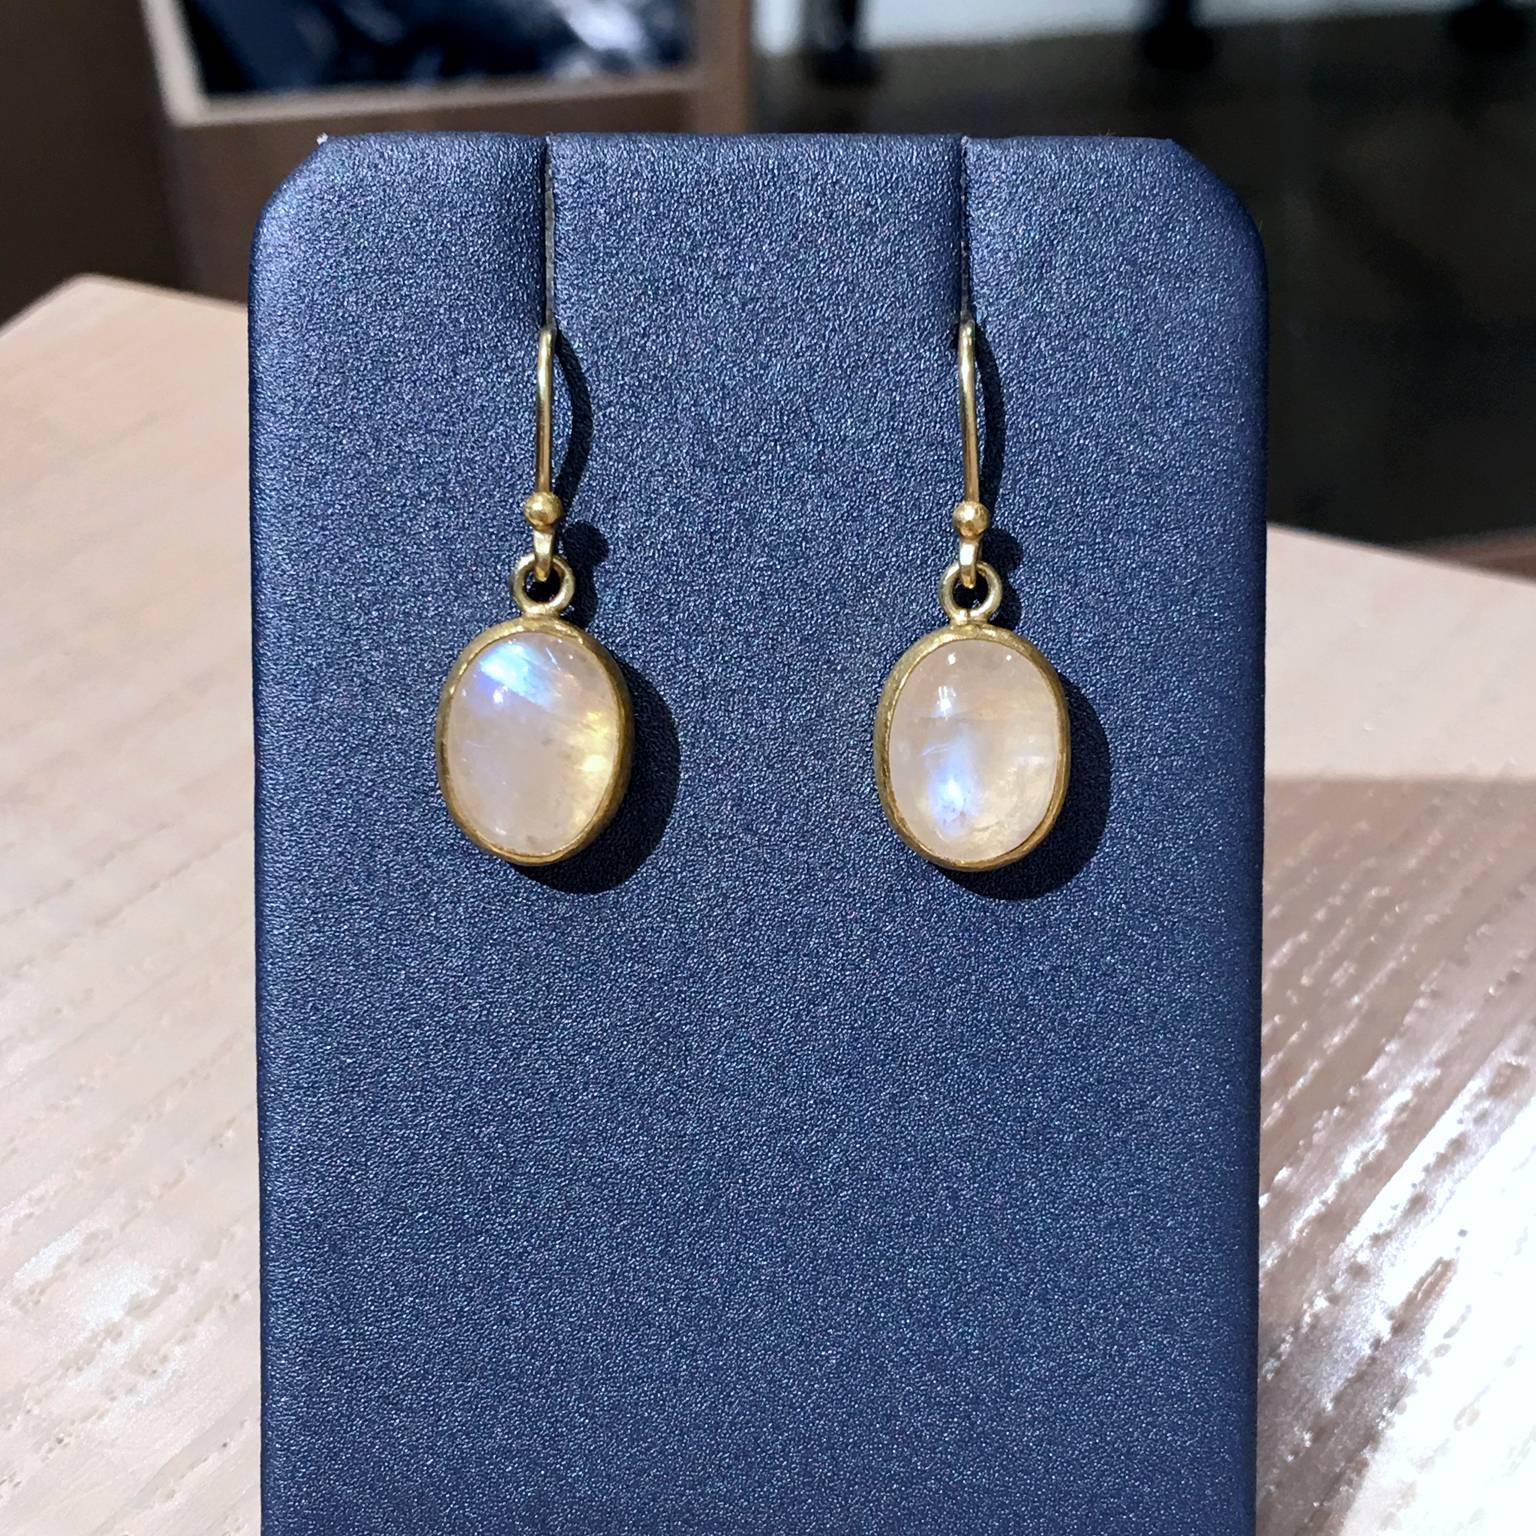 Dangle Drop Earrings by jewelry designer Petra Class handcrafted in her signature finish 22k yellow gold with two bezel-set and cabochon-cut blue moonstones on 18k yellow gold earwires. 

Stamped and Halllmarked 22k / 18k / PC